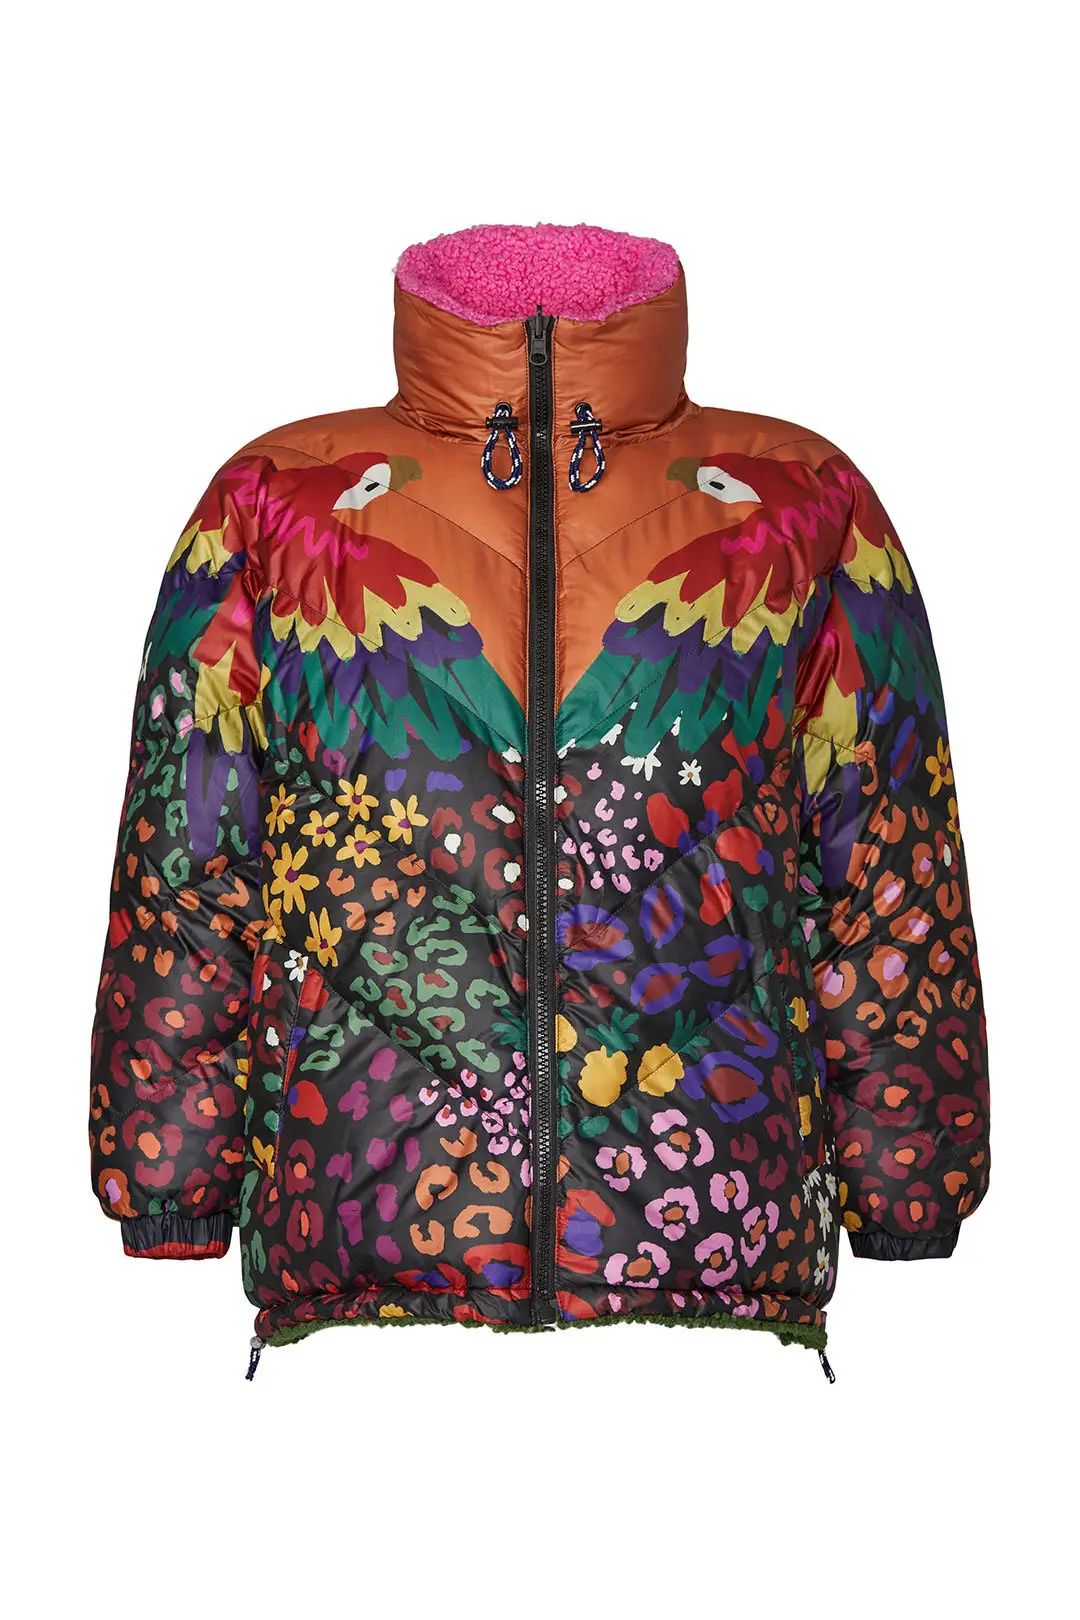 FARM Rio Printed Macaw Mixed Media Puffer | Rent the Runway